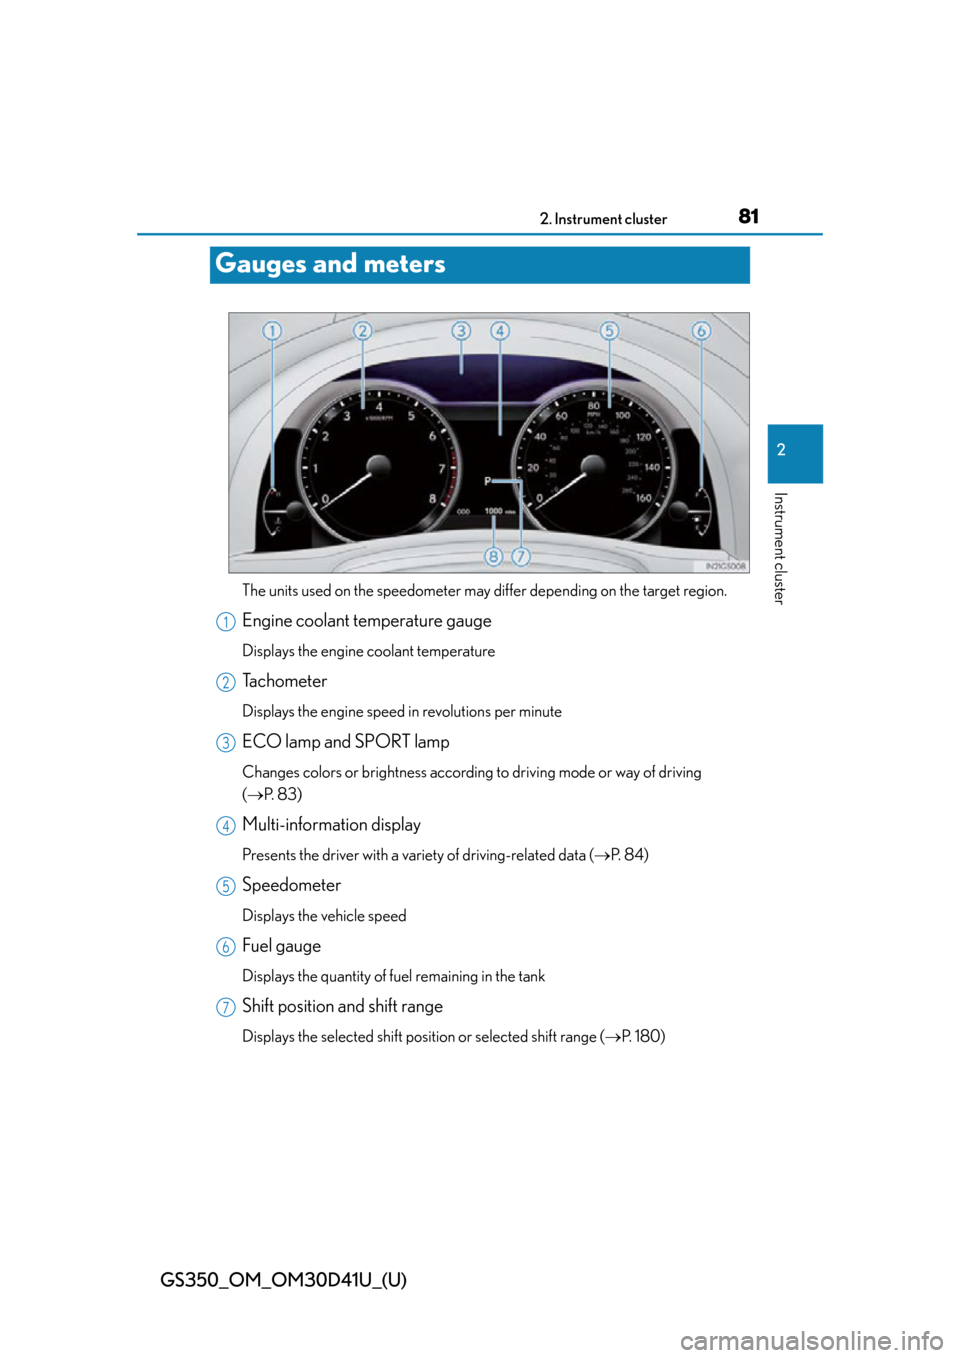 Lexus GS350 2014  Do-it-yourself maintenance / LEXUS 2014 GS350 OWNERS MANUAL (OM30D41U) 81
GS350_OM_OM30D41U_(U)2. Instrument cluster
2
Instrument cluster
Gauges and meters
The units used on the speedometer may di ffer depending on the target region.
Engine coolant temperature gauge
Disp